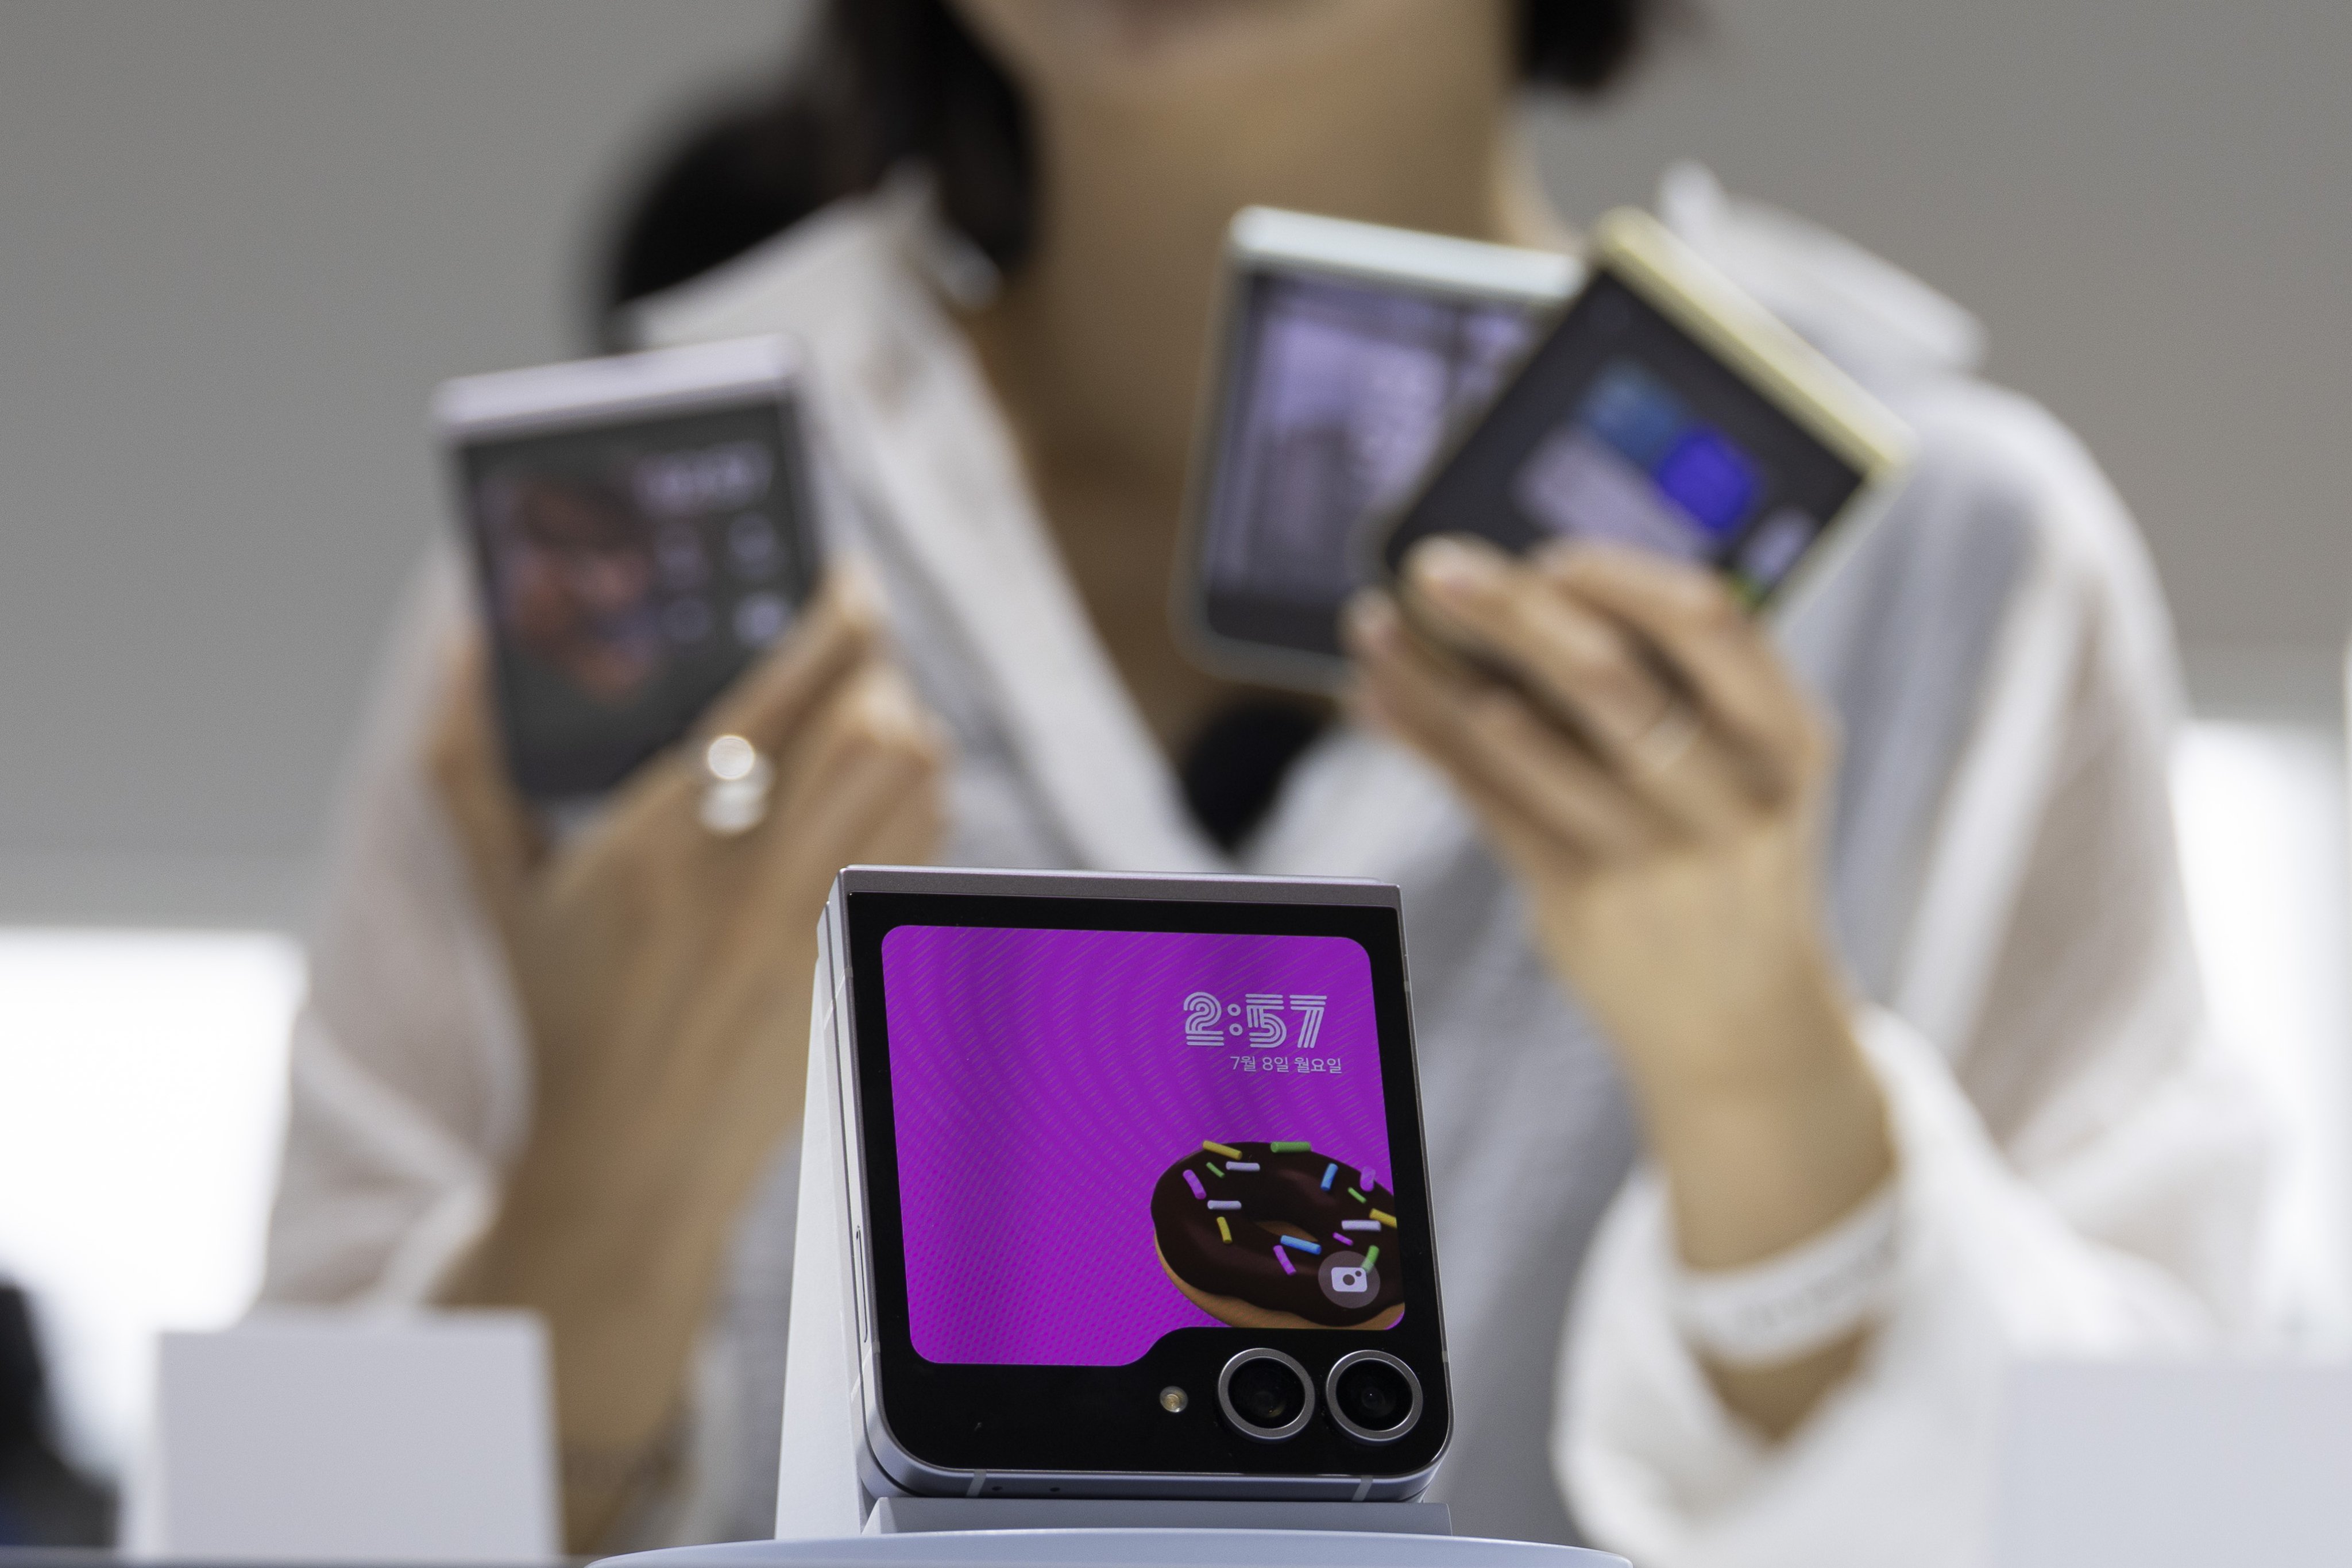 Samsung Electronics’ ByteDance AI-supported foldable handsets for China could potentially boost demand for its devices in the world’s largest smartphone market. Photo: EPA-EFE